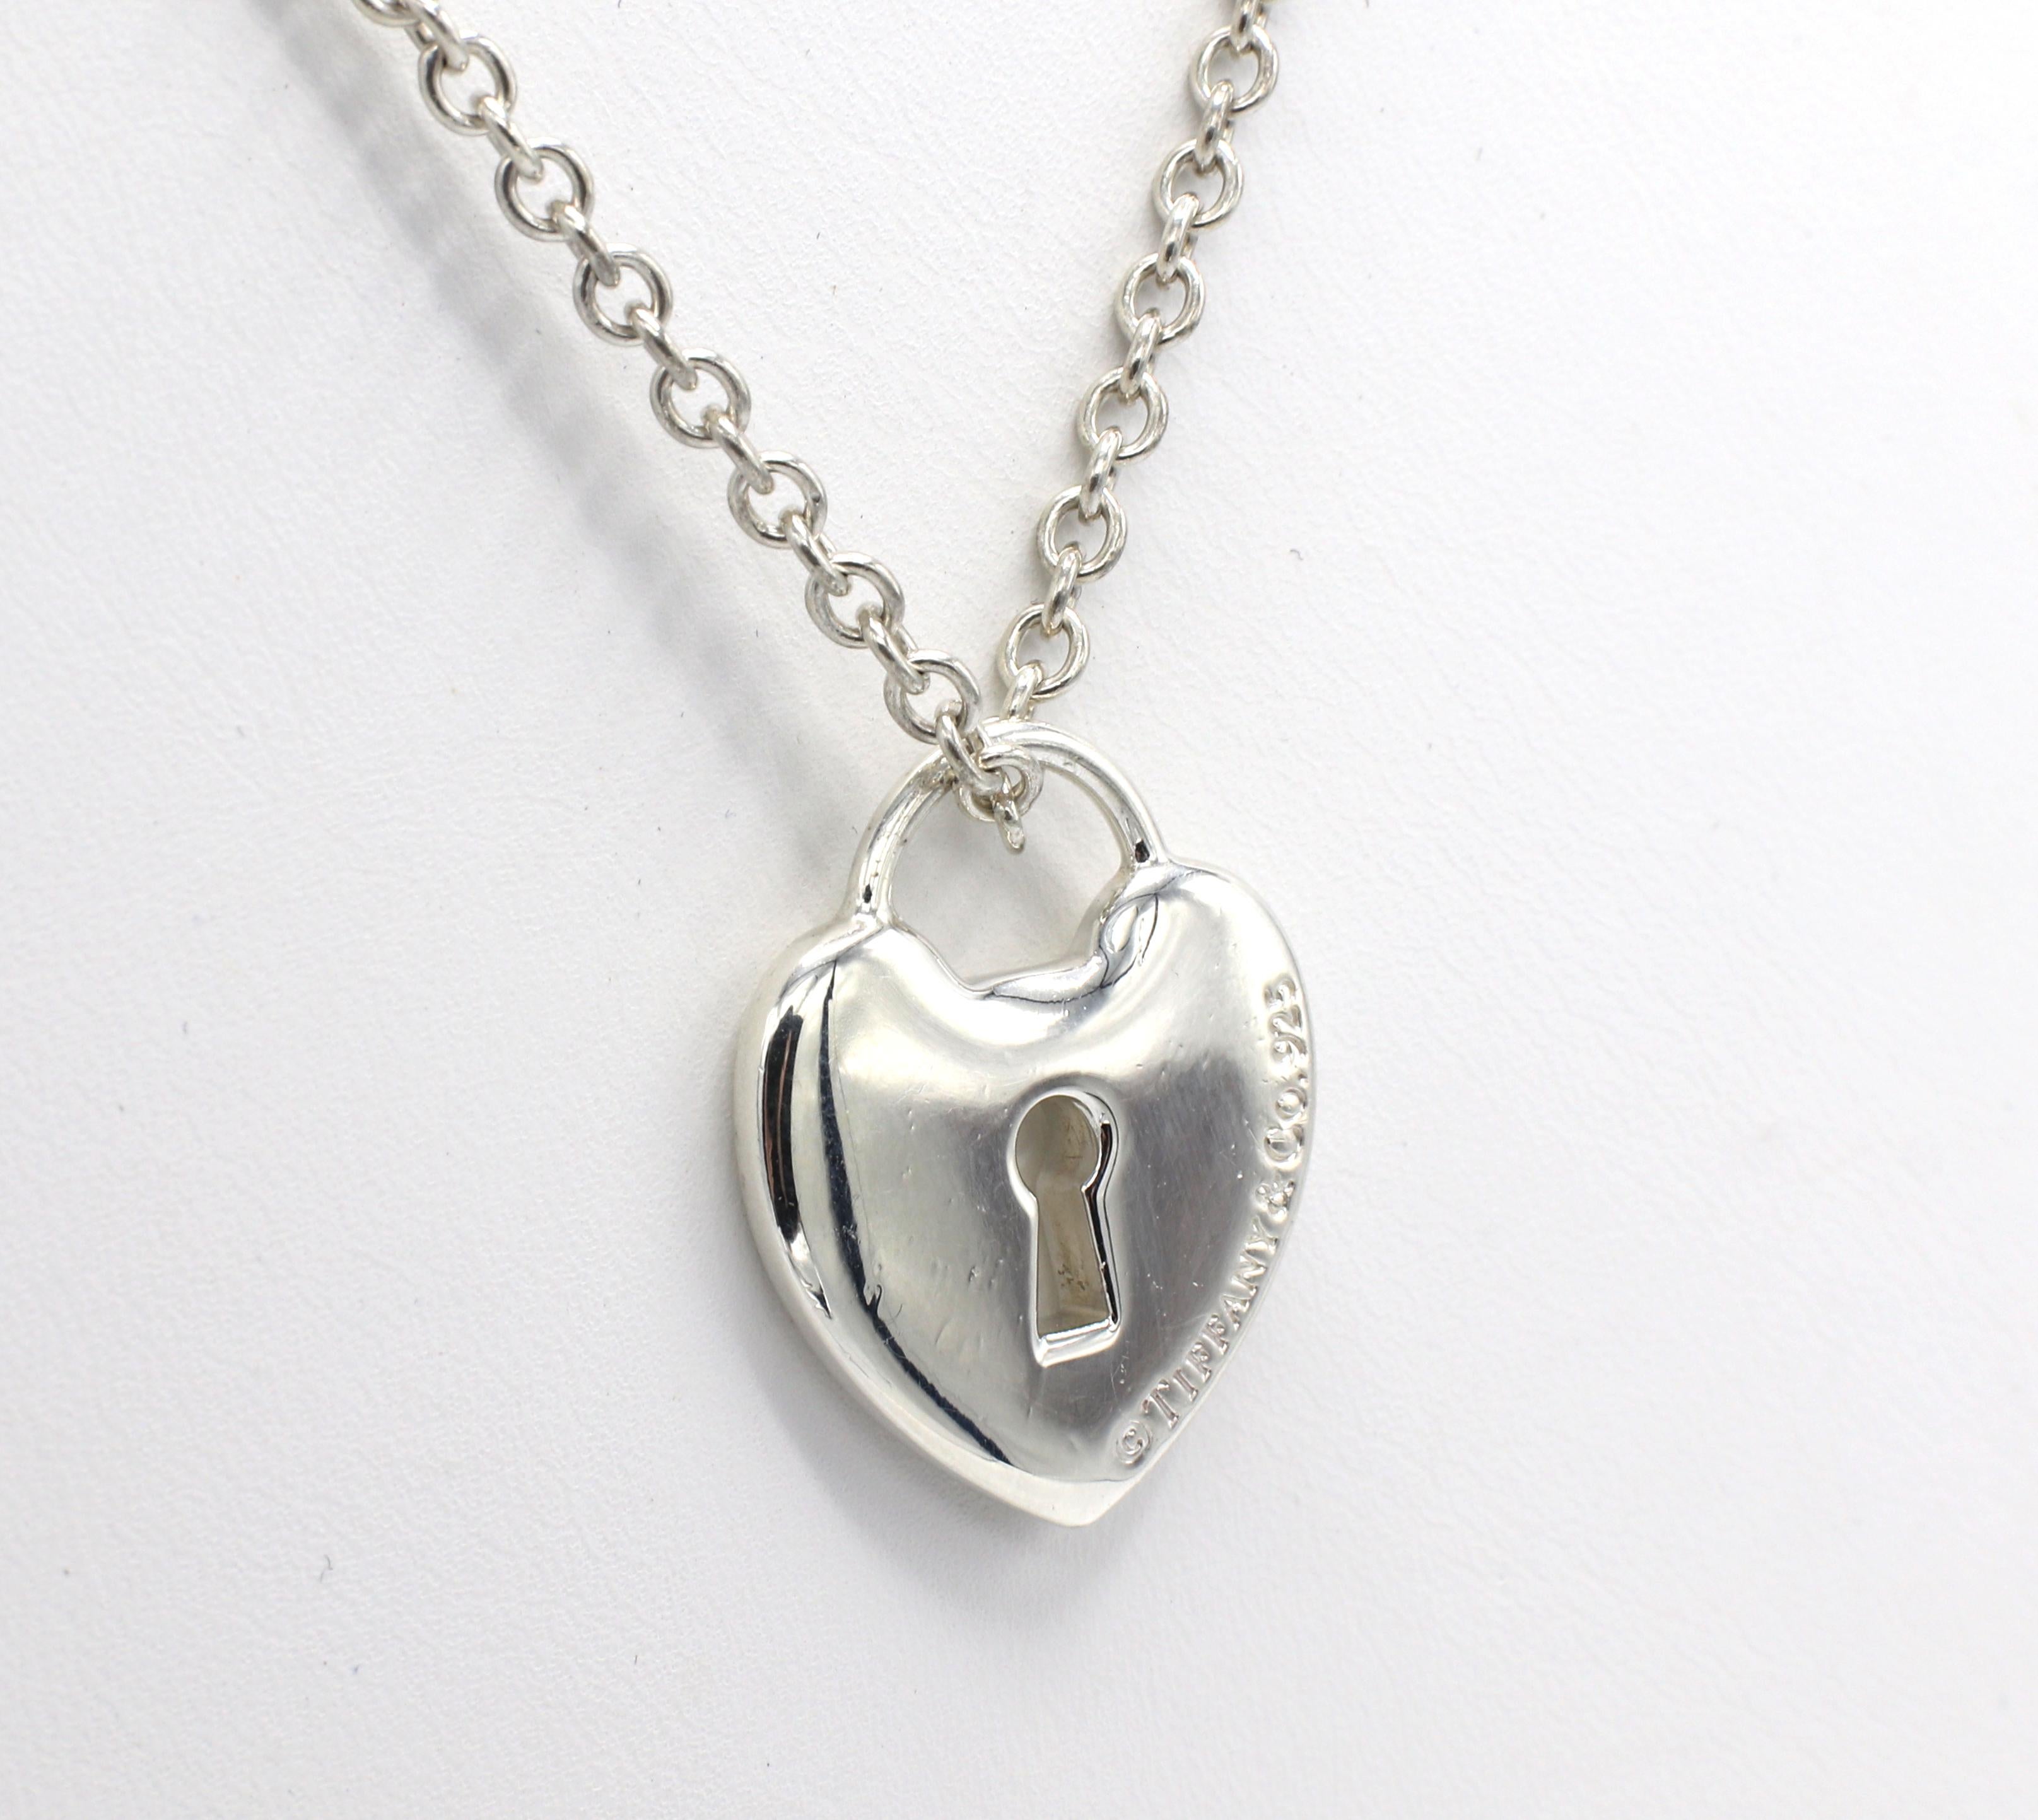 Tiffany & Co. Sterling Silver Heart Lock Pendant Necklace 
Metal: Sterling silver 925
Weight: 18.4 grams
Pendant: 25 x 20mm
Chain length: 24 inches
Chain width: 2.8mm
Signed: Tiffany & Co. 925 
